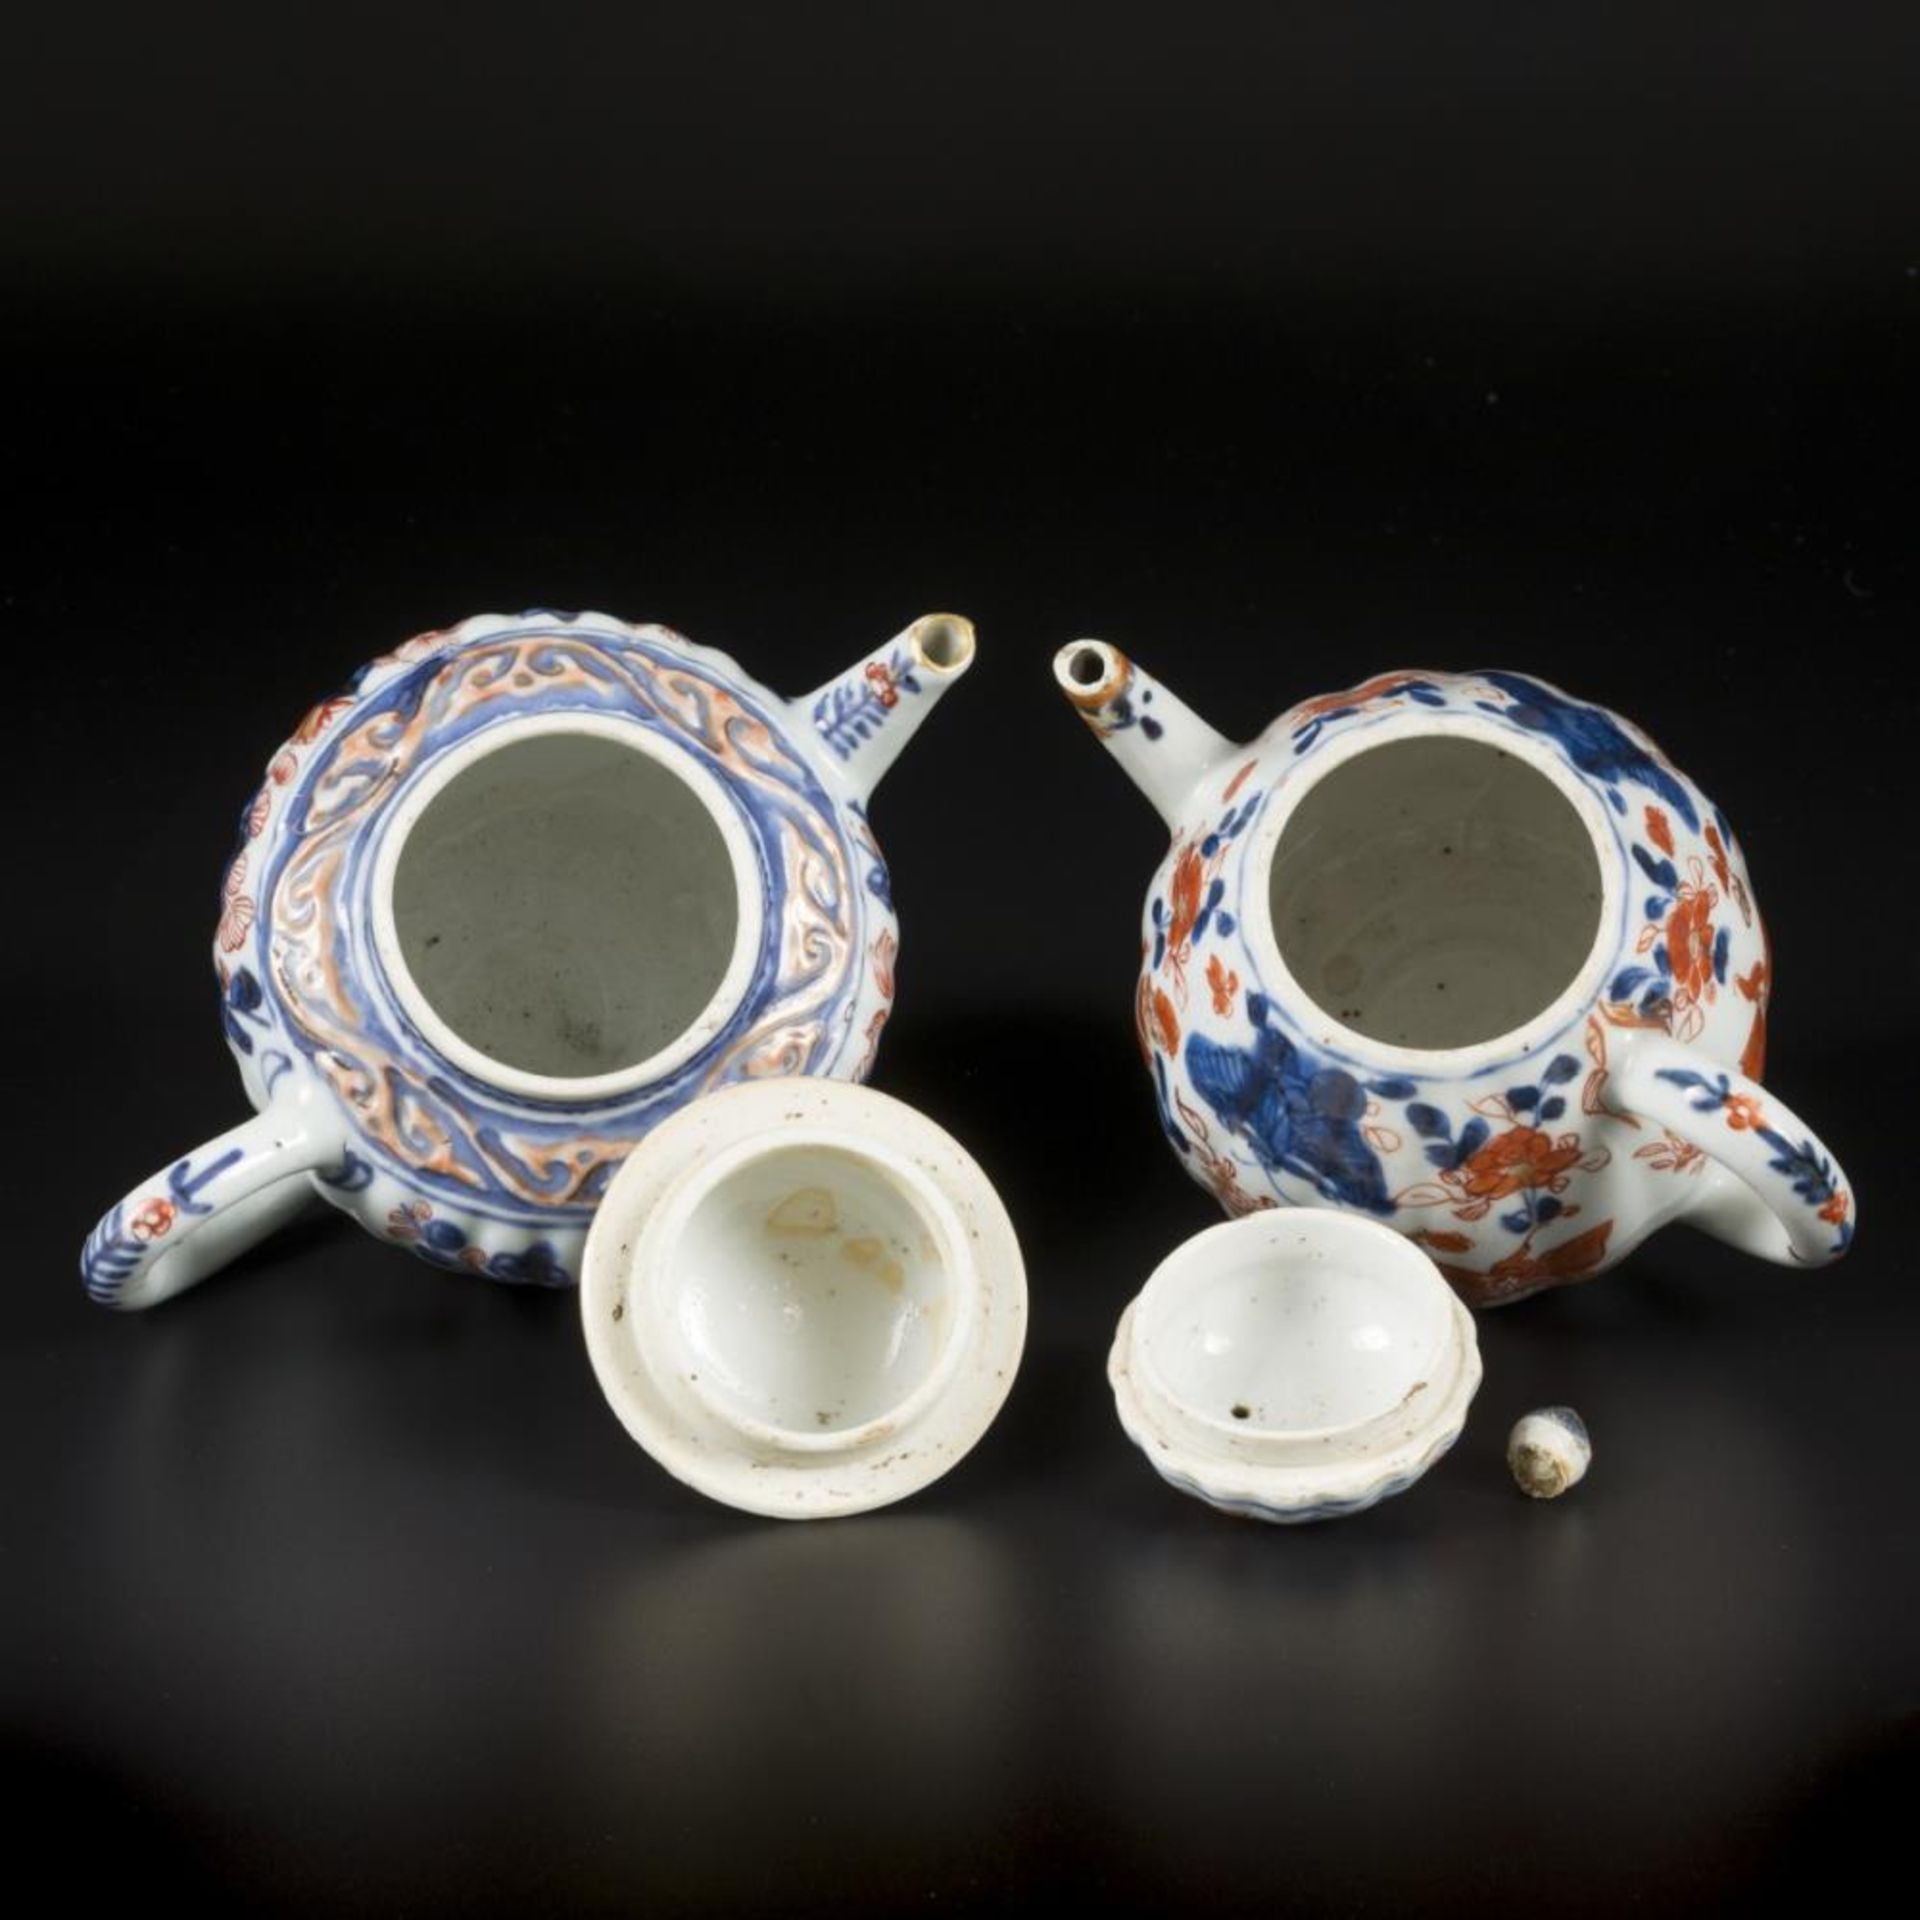 A lot of (2) porcelain teapots with Imari decoration. China, 18th century. - Image 9 of 12